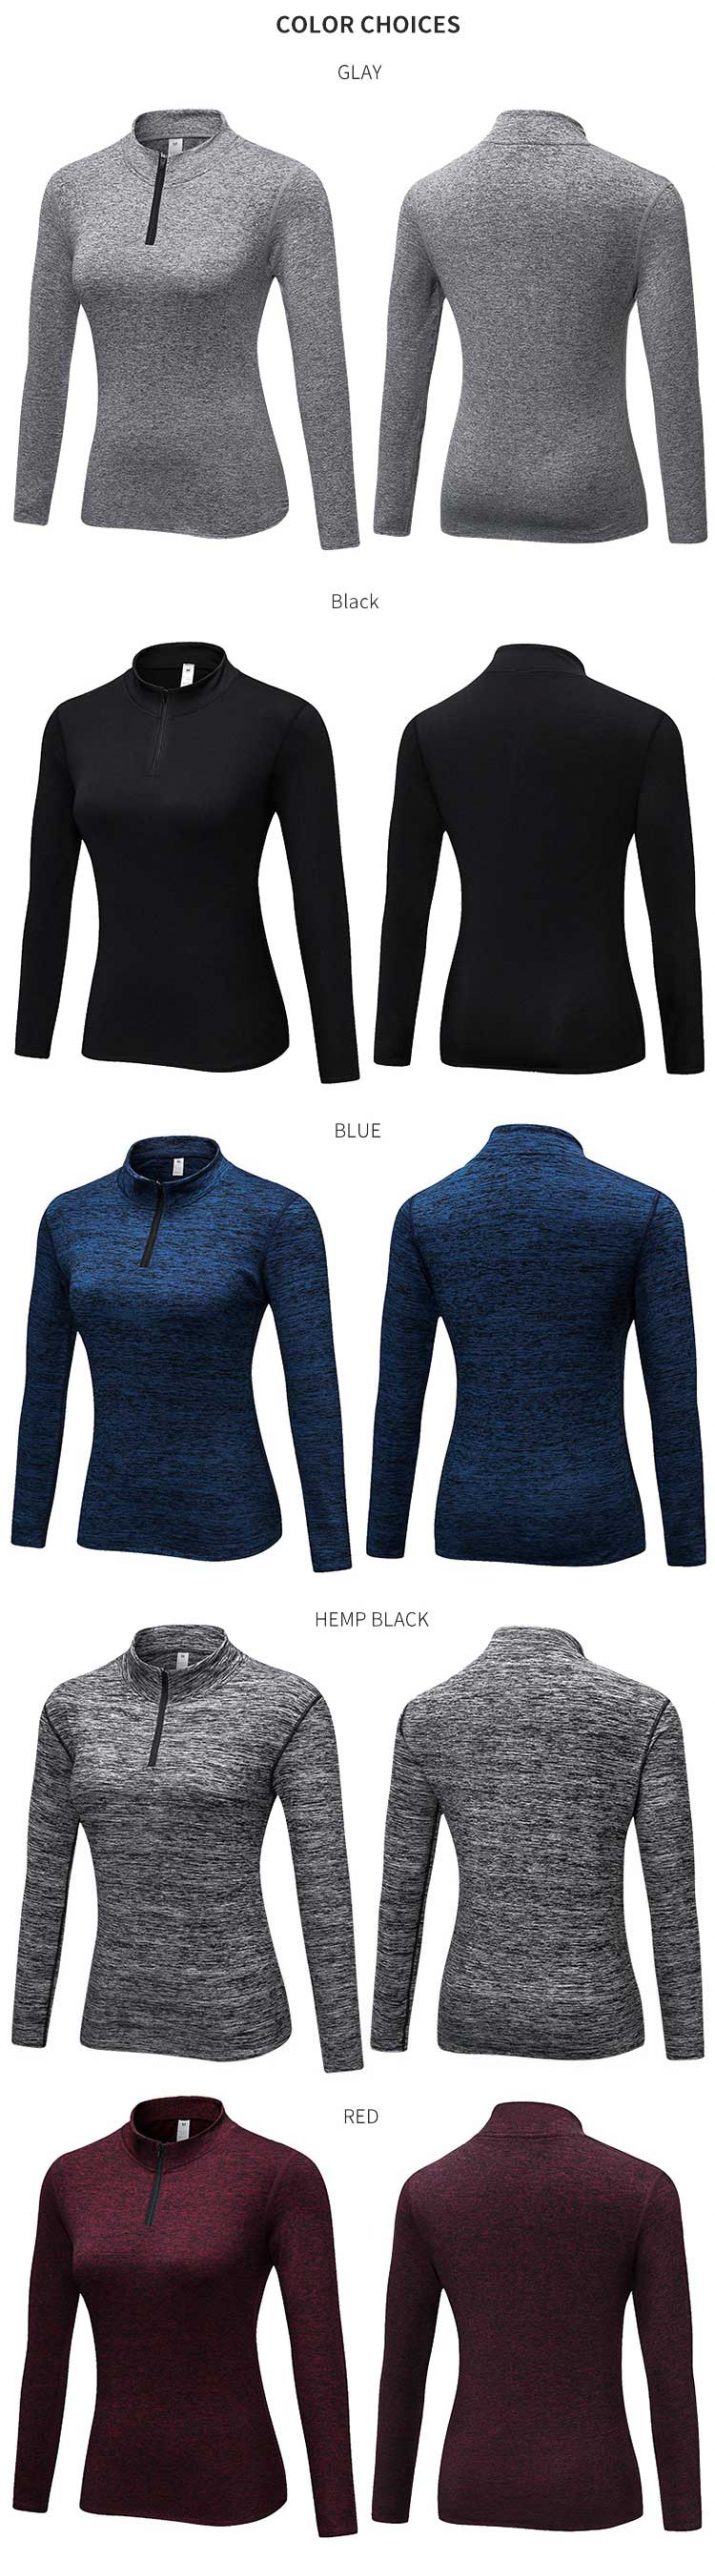 High-neck-workout-shirt-long-sleeve-shirts-color-choices